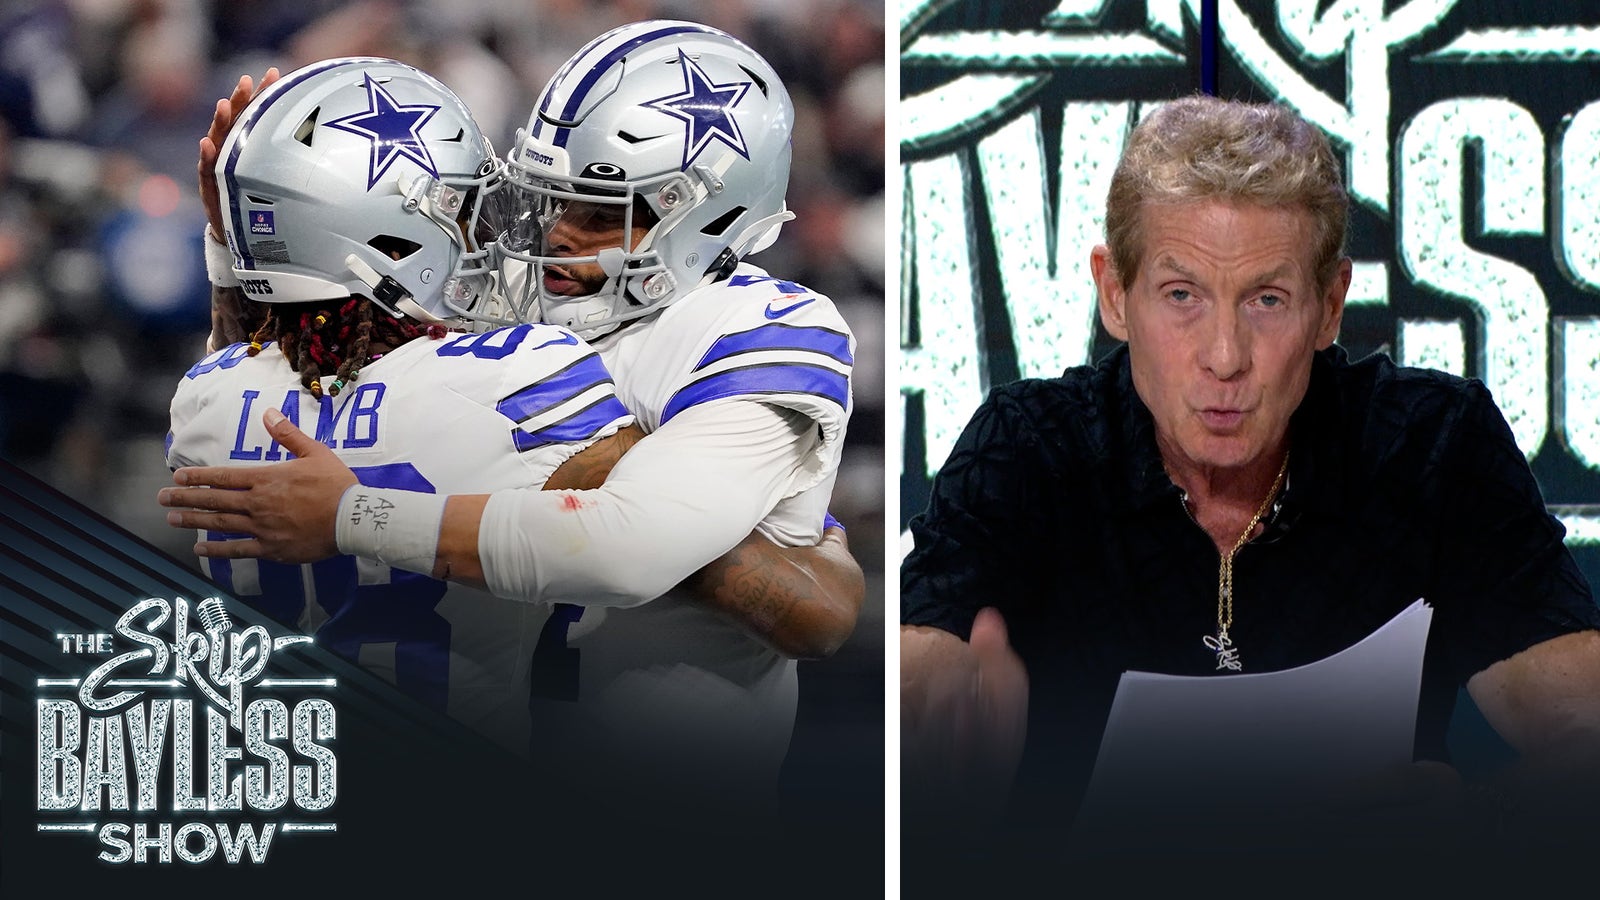 Skip Bayless responds to accusations that he's a 'delusional' Cowboys fan